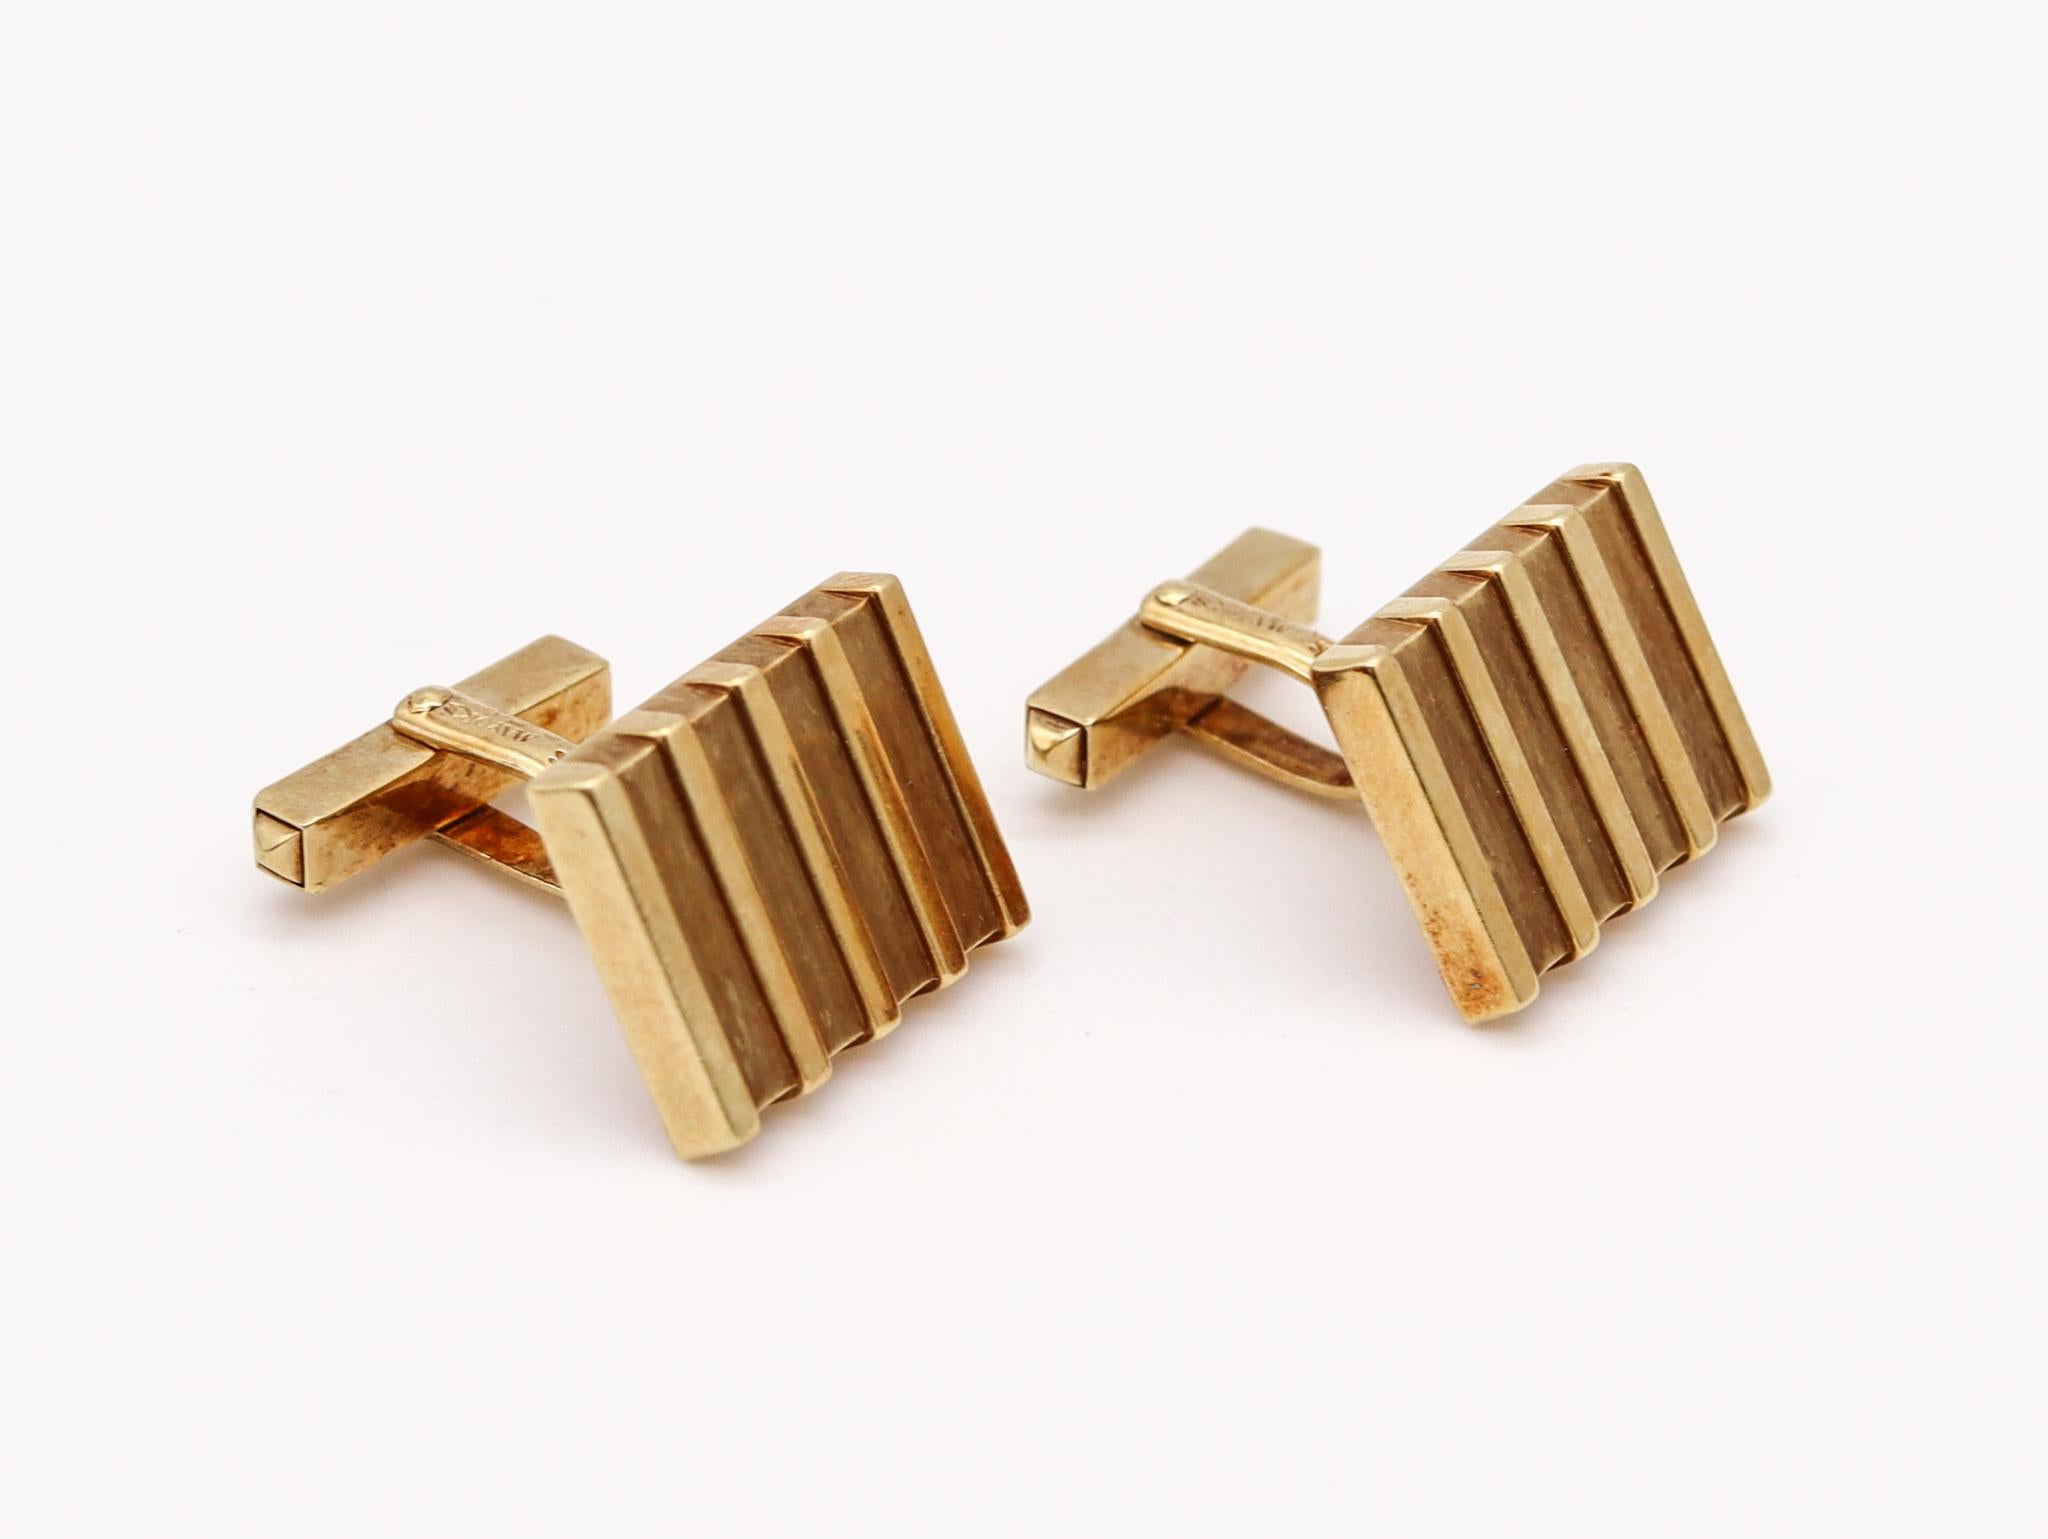 Pair of Cufflinks made by Piaget for Mayors.

Elegant and sleek pair of cufflinks, created by Paget for Mayors jewelers, back in the 1980. These pair has been crafted with geometric patterns in solid yellow gold of 18 karats with backs in 14 karats